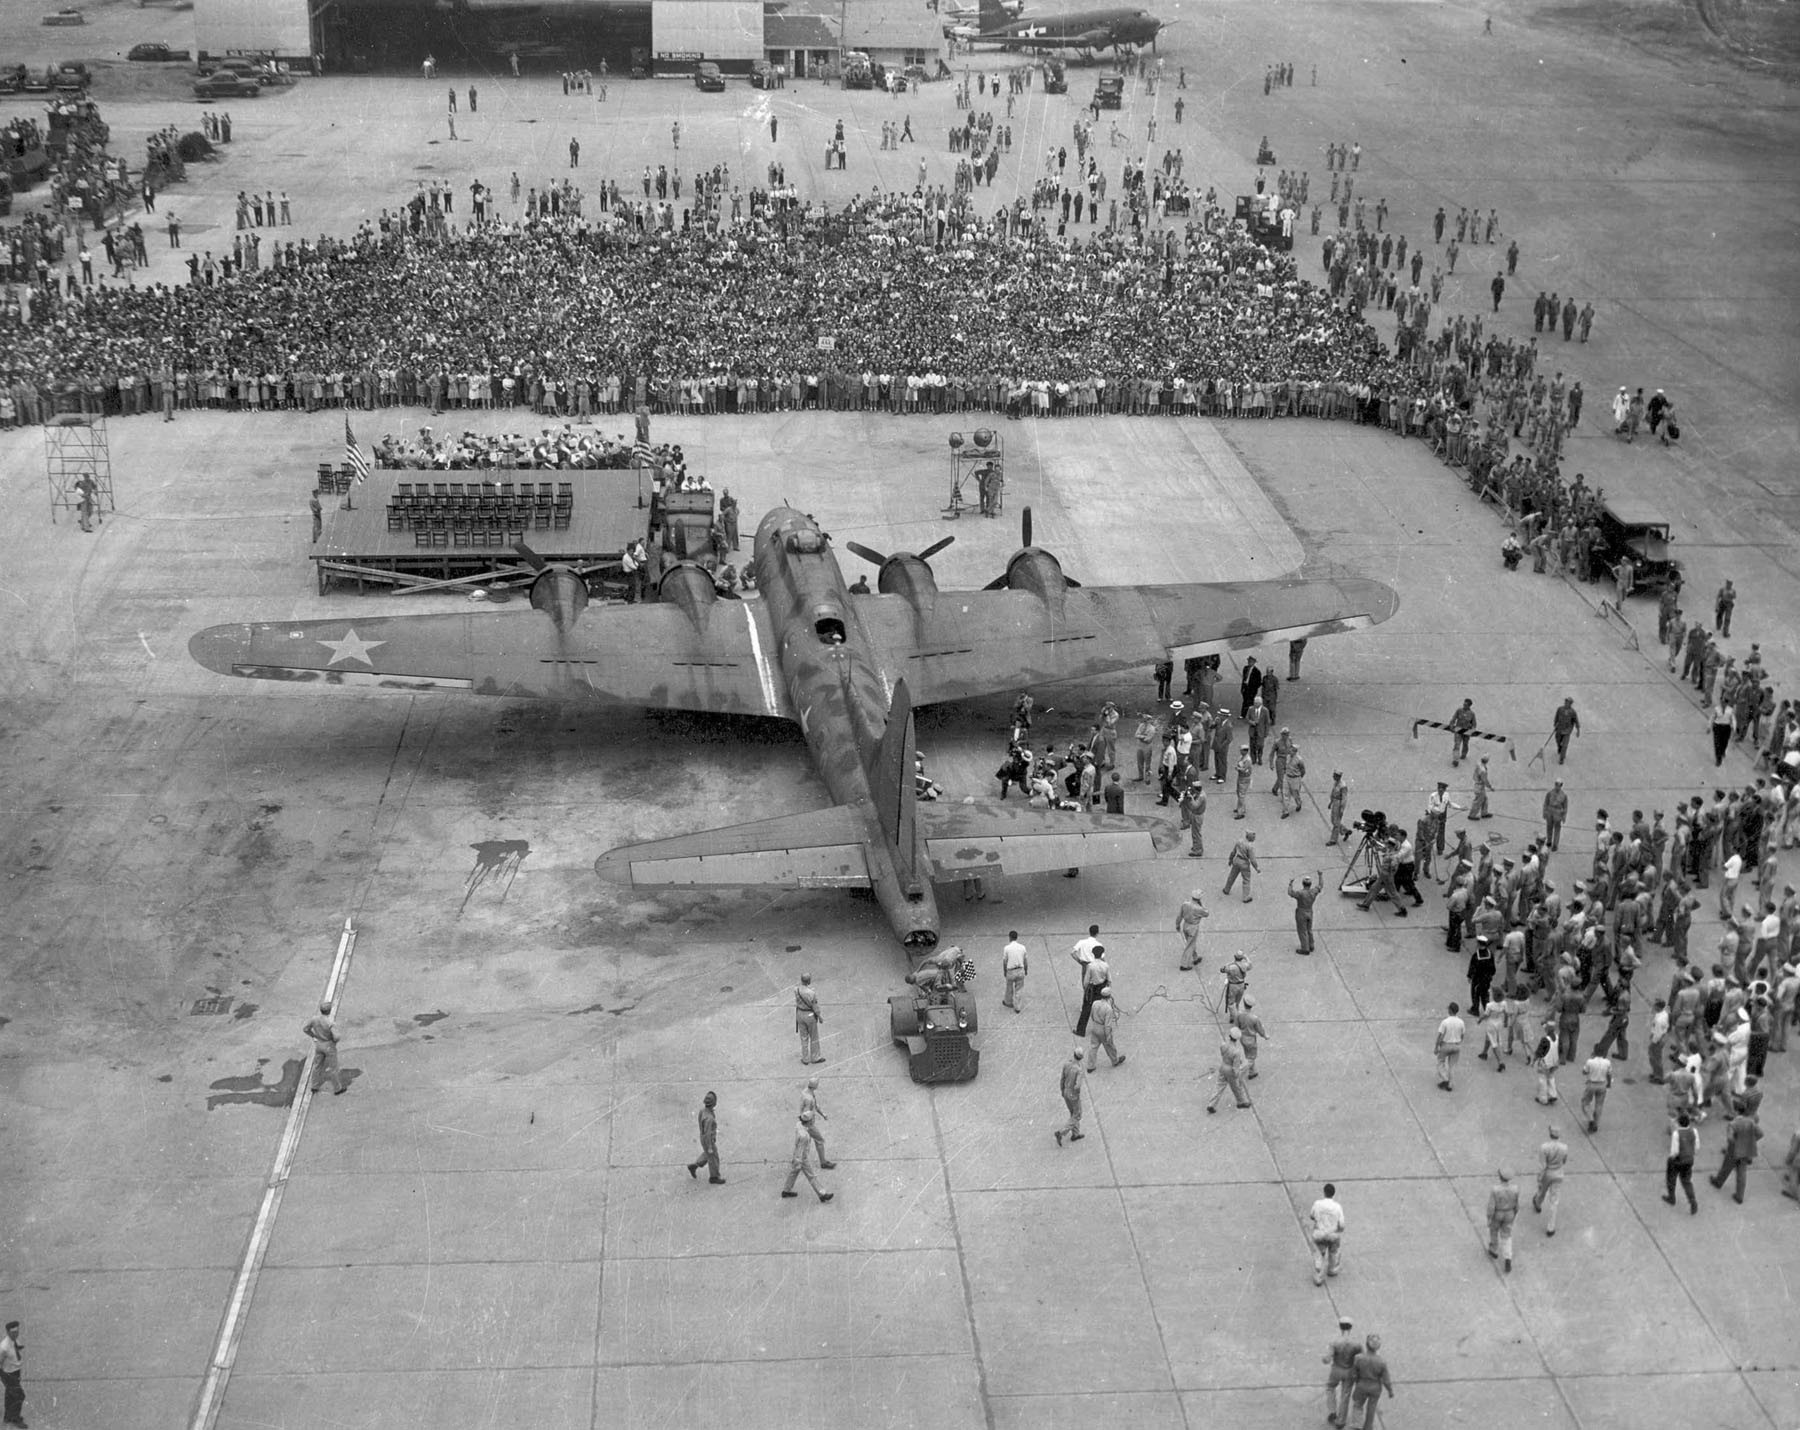 Why the Memphis Beauty became the most famous bomber of World War II - My, Military aviation, Military history, The Second World War, History of the Second World War, , Flying fortress, Video, Longpost